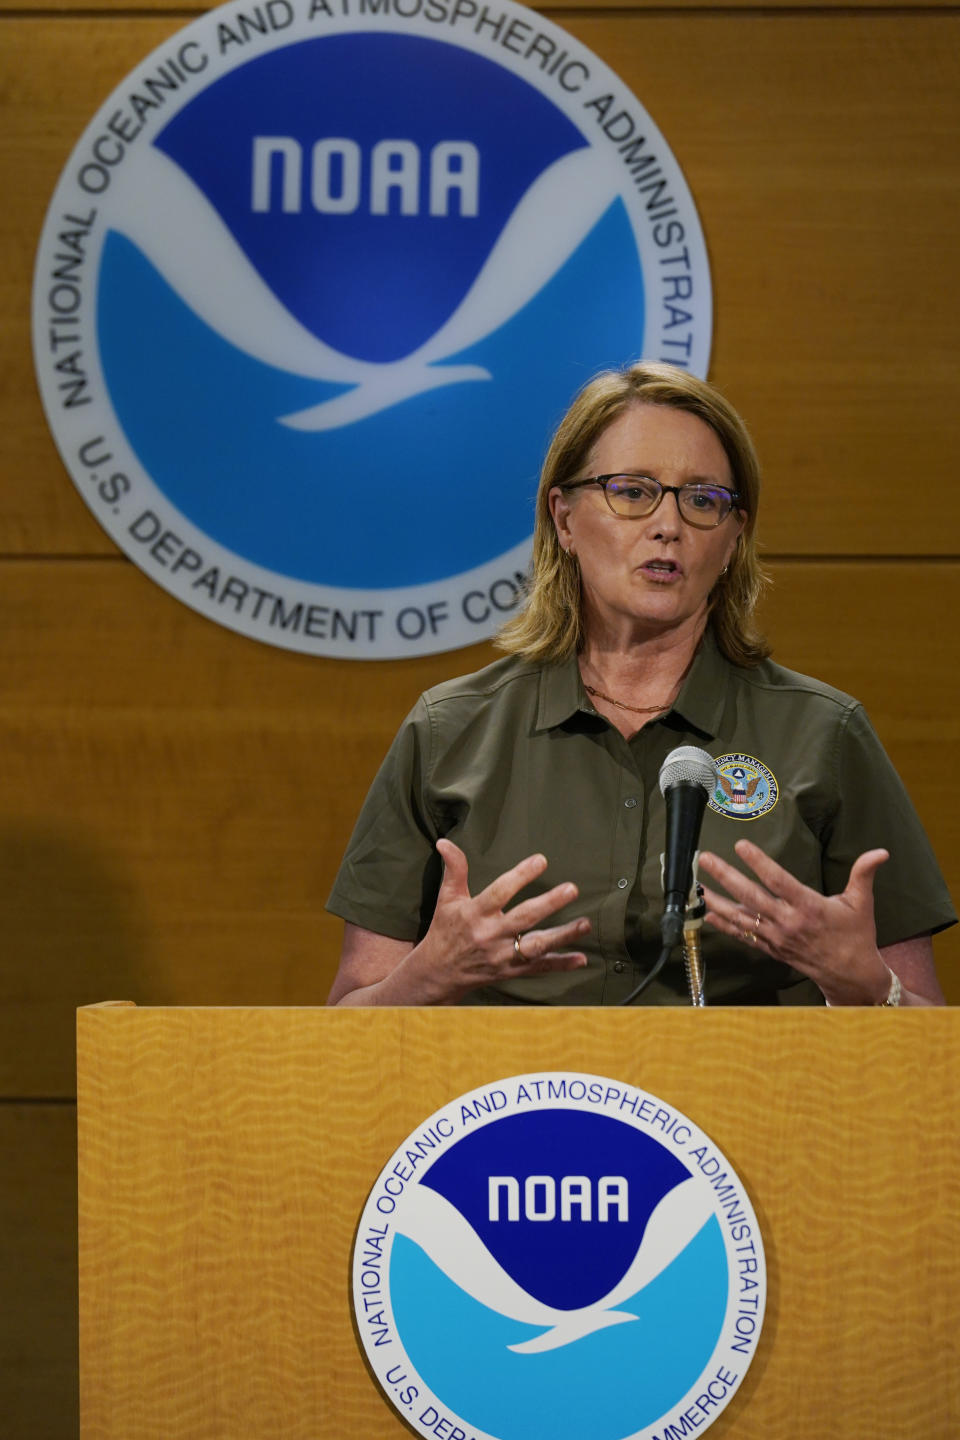 FEMA Director Deanne Criswell speaks during a news conference, Wednesday, May 31, 2023, in Miami. Criswell and Mike Brennan, Director of the National Hurricane Center, discussed preparedness for hurricane season, which begins June 1. (AP Photo/Marta Lavandier)